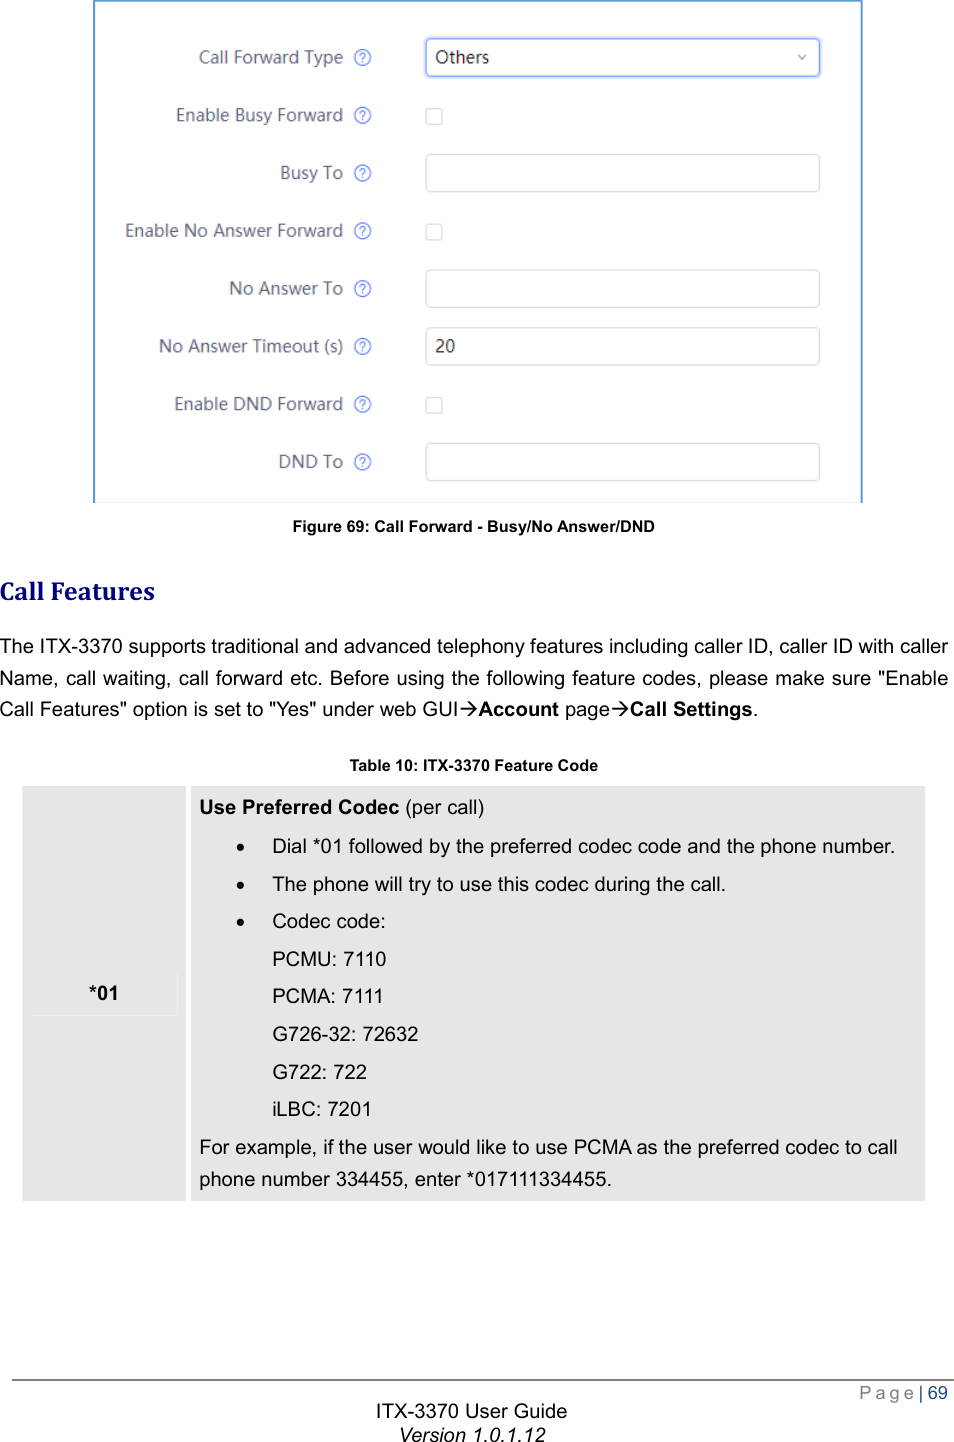  Page| 69  ITX-3370 User Guide Version 1.0.1.12   Figure 69: Call Forward - Busy/No Answer/DND Call Features The ITX-3370 supports traditional and advanced telephony features including caller ID, caller ID with caller Name, call waiting, call forward etc. Before using the following feature codes, please make sure &quot;Enable Call Features&quot; option is set to &quot;Yes&quot; under web GUIàAccount pageàCall Settings. Table 10: ITX-3370 Feature Code *01 Use Preferred Codec (per call) · Dial *01 followed by the preferred codec code and the phone number. · The phone will try to use this codec during the call. · Codec code: PCMU: 7110 PCMA: 7111 G726-32: 72632 G722: 722 iLBC: 7201 For example, if the user would like to use PCMA as the preferred codec to call phone number 334455, enter *017111334455. 